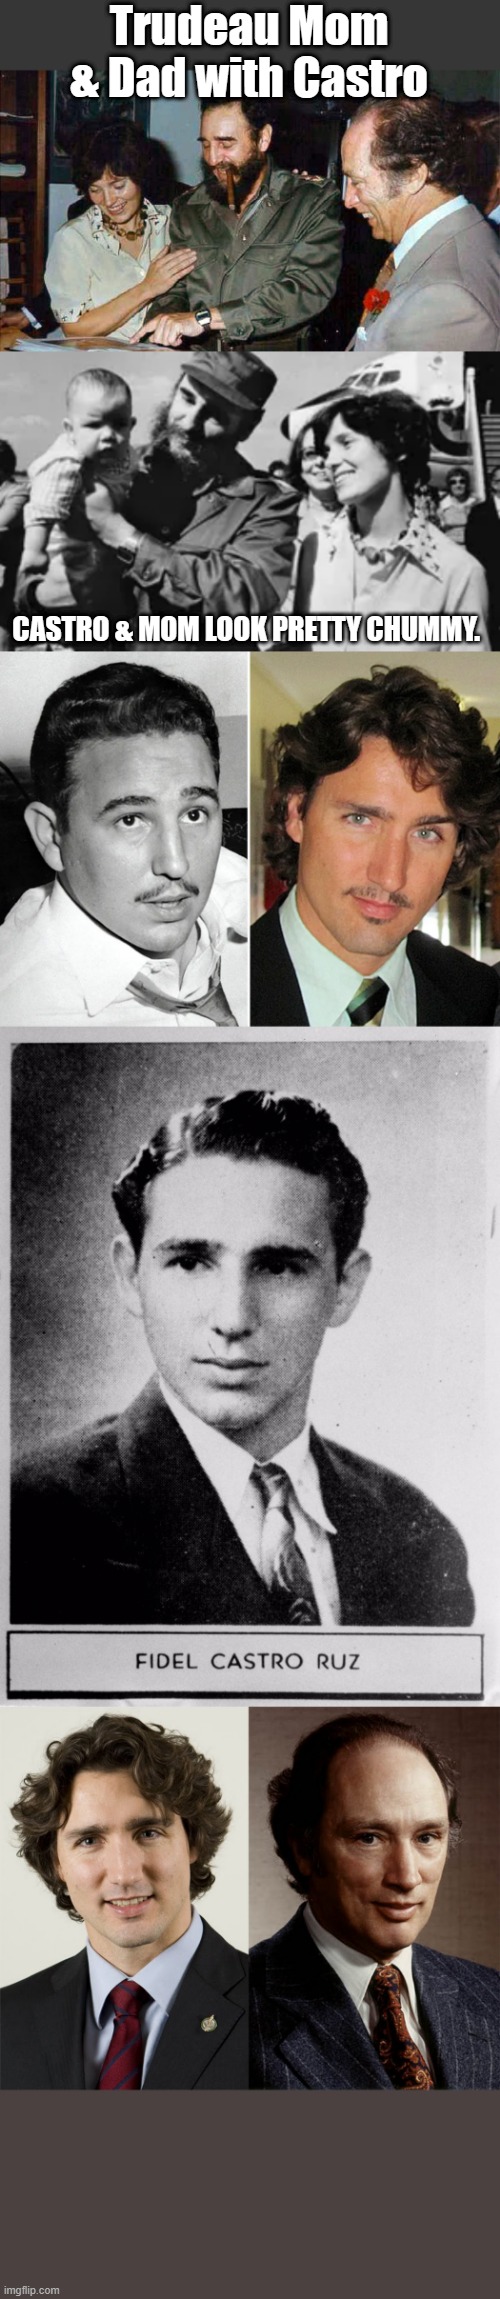 Whos your Daddy? | Trudeau Mom & Dad with Castro; CASTRO & MOM LOOK PRETTY CHUMMY. | image tagged in criminals,democrats | made w/ Imgflip meme maker